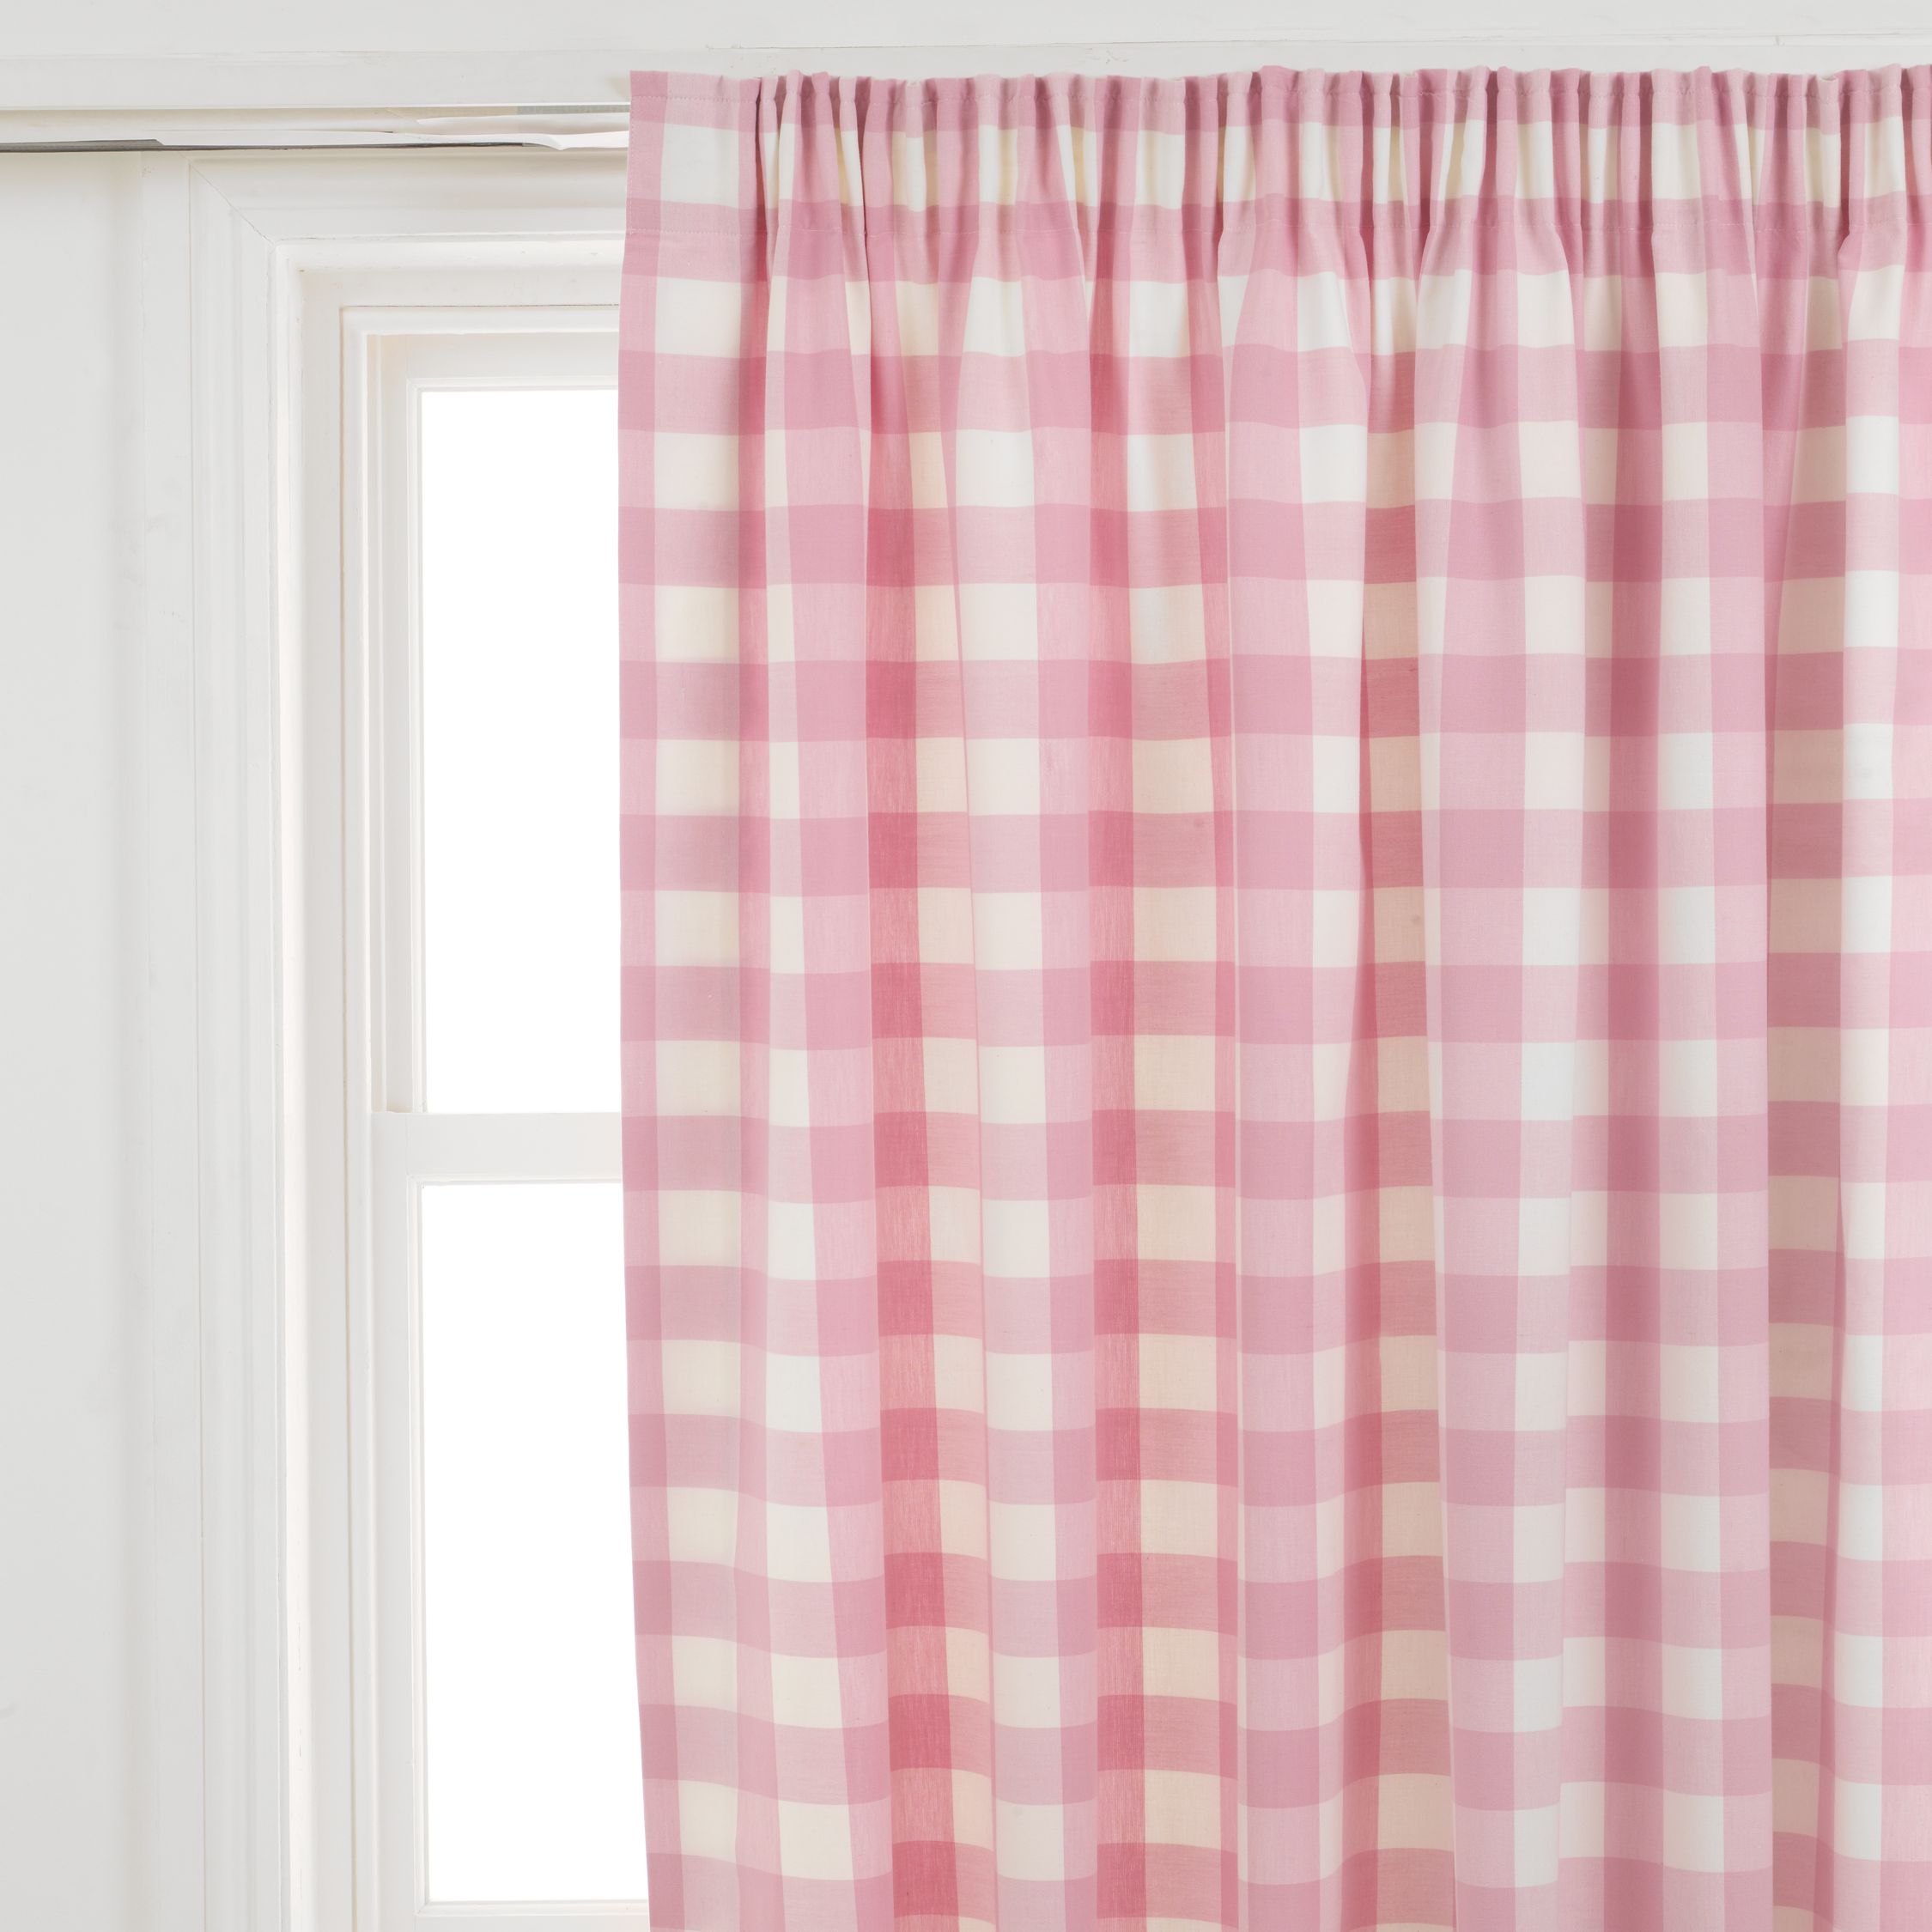 Large Check Pencil Pleat Curtains, Pink